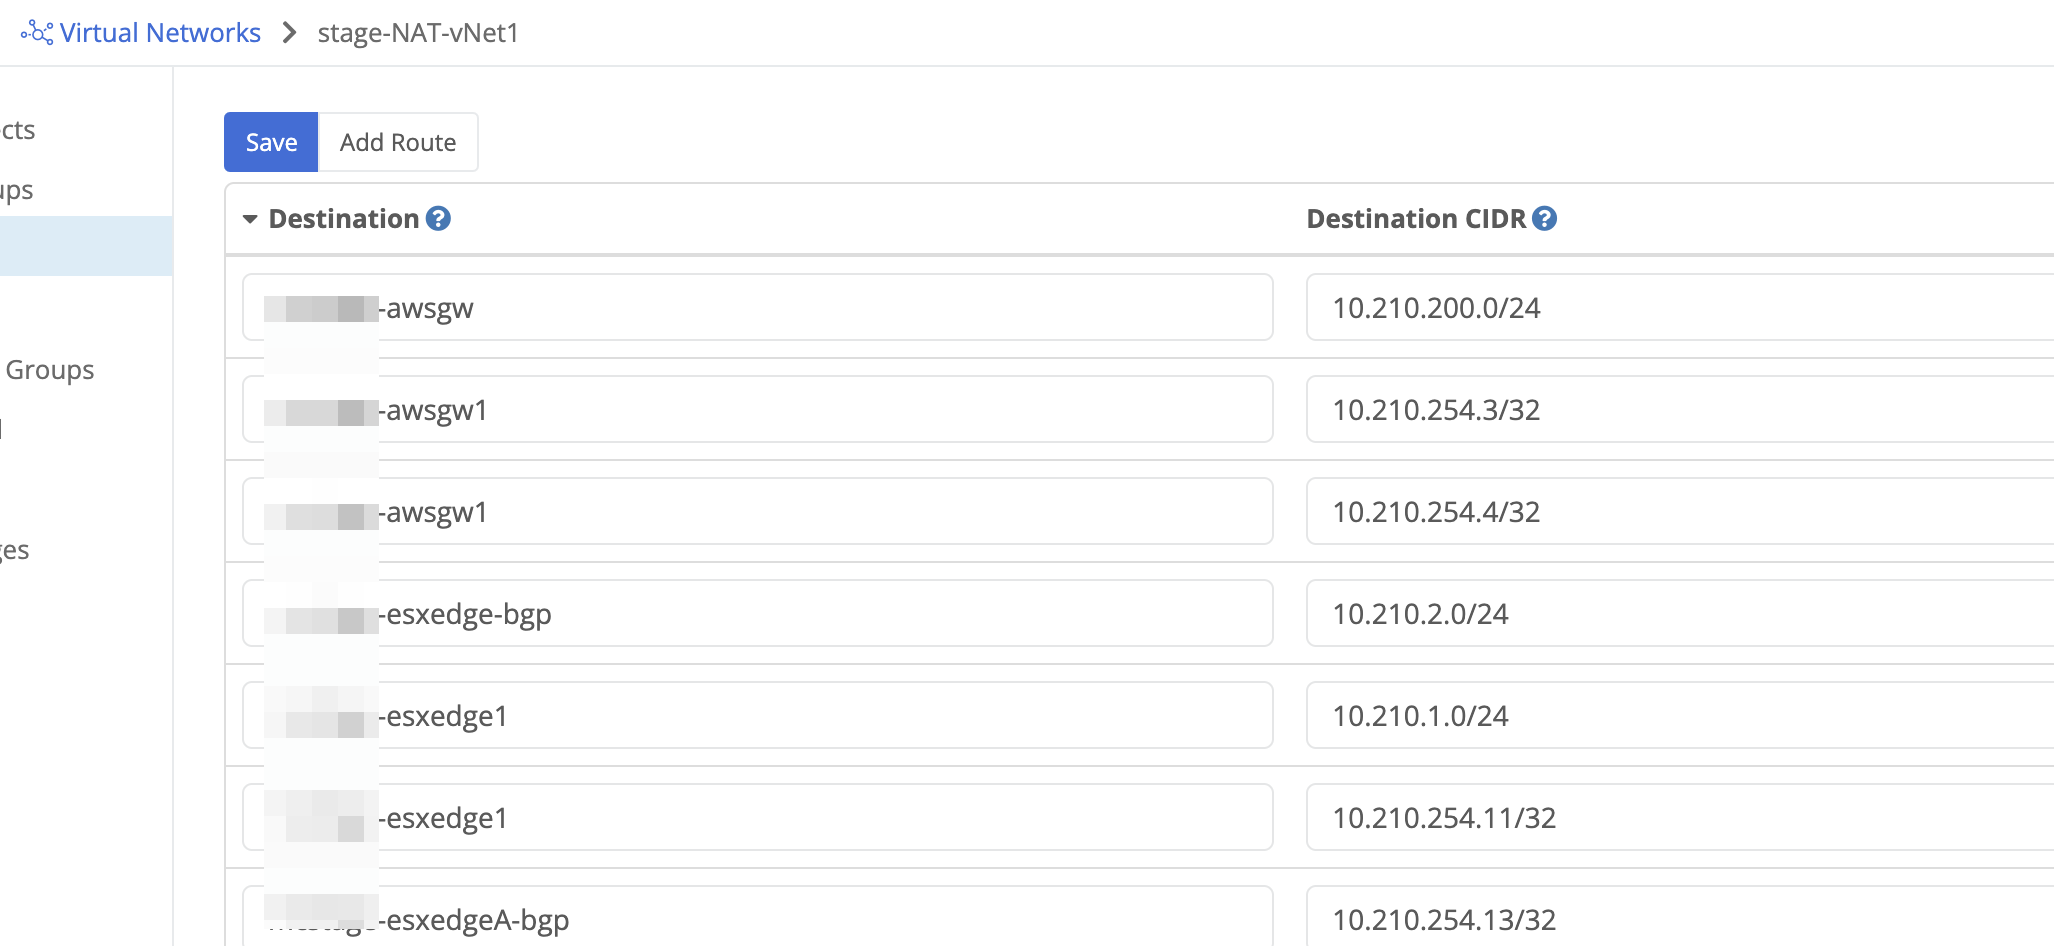 Table with multiple routes listing their Destination device, Destination CIDR, Metric and Description. Sorted by the destination device.